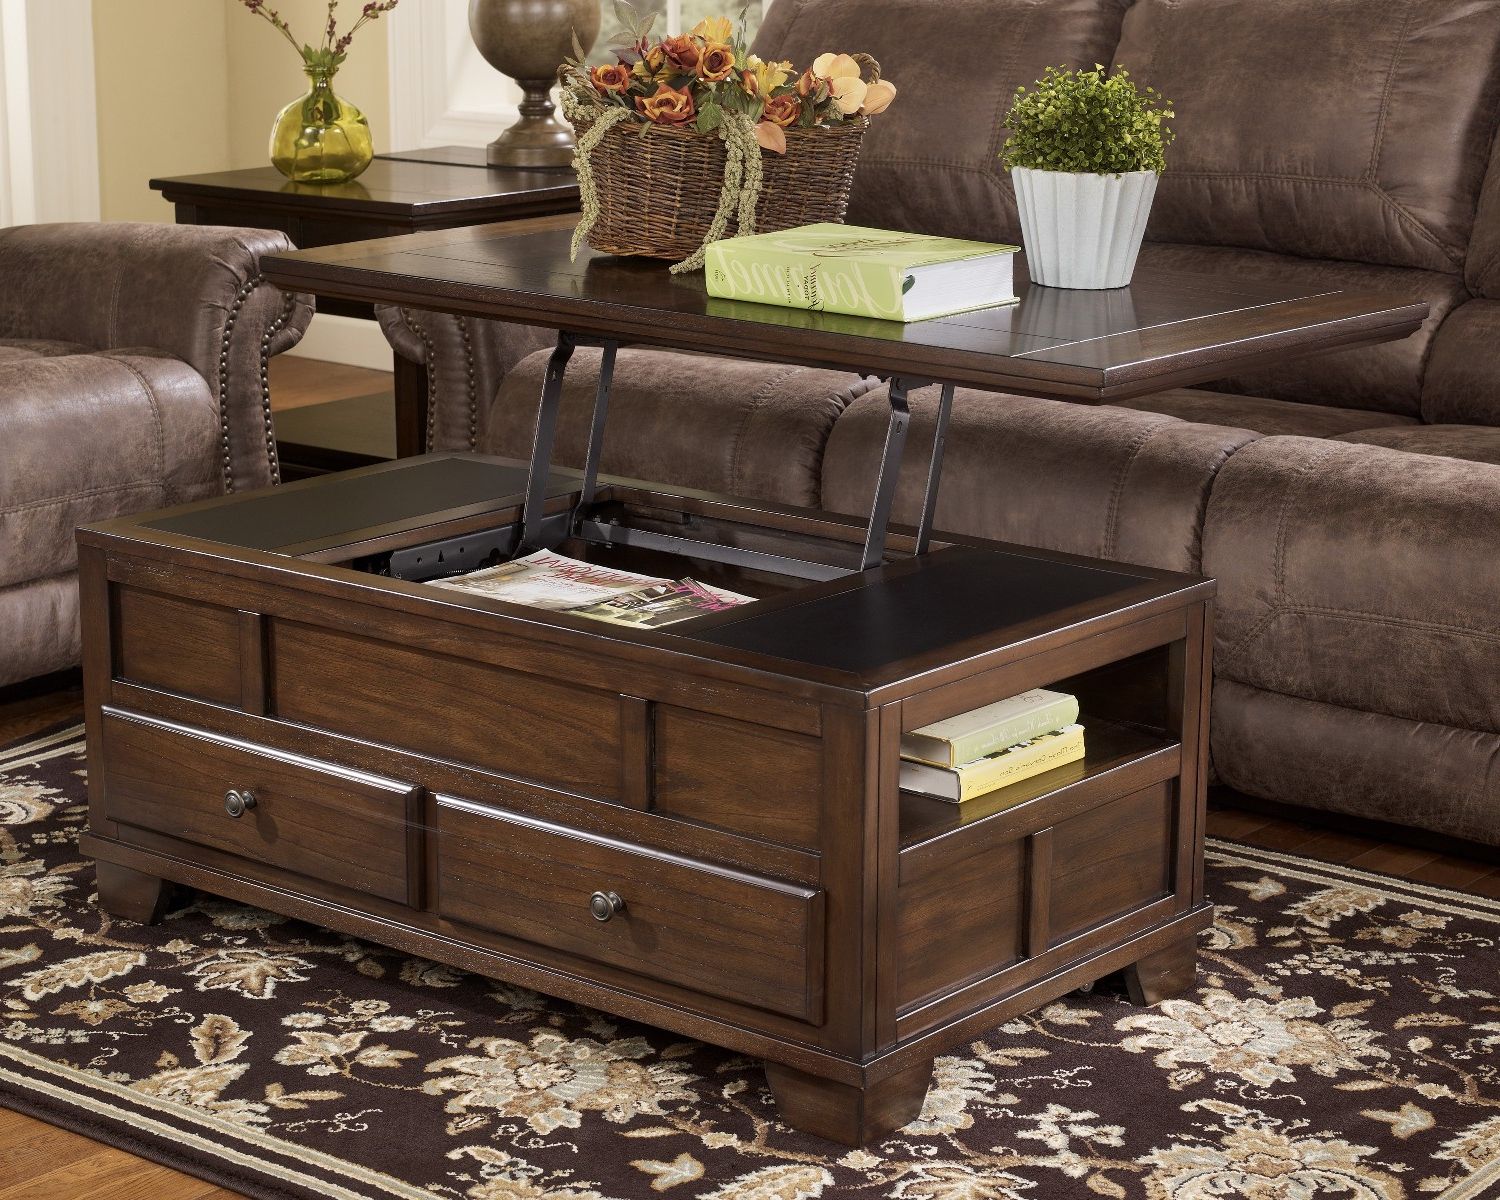 11 Trunk Style Coffee Table Set Pics Pertaining To Favorite Espresso Wood Storage Coffee Tables (View 5 of 20)